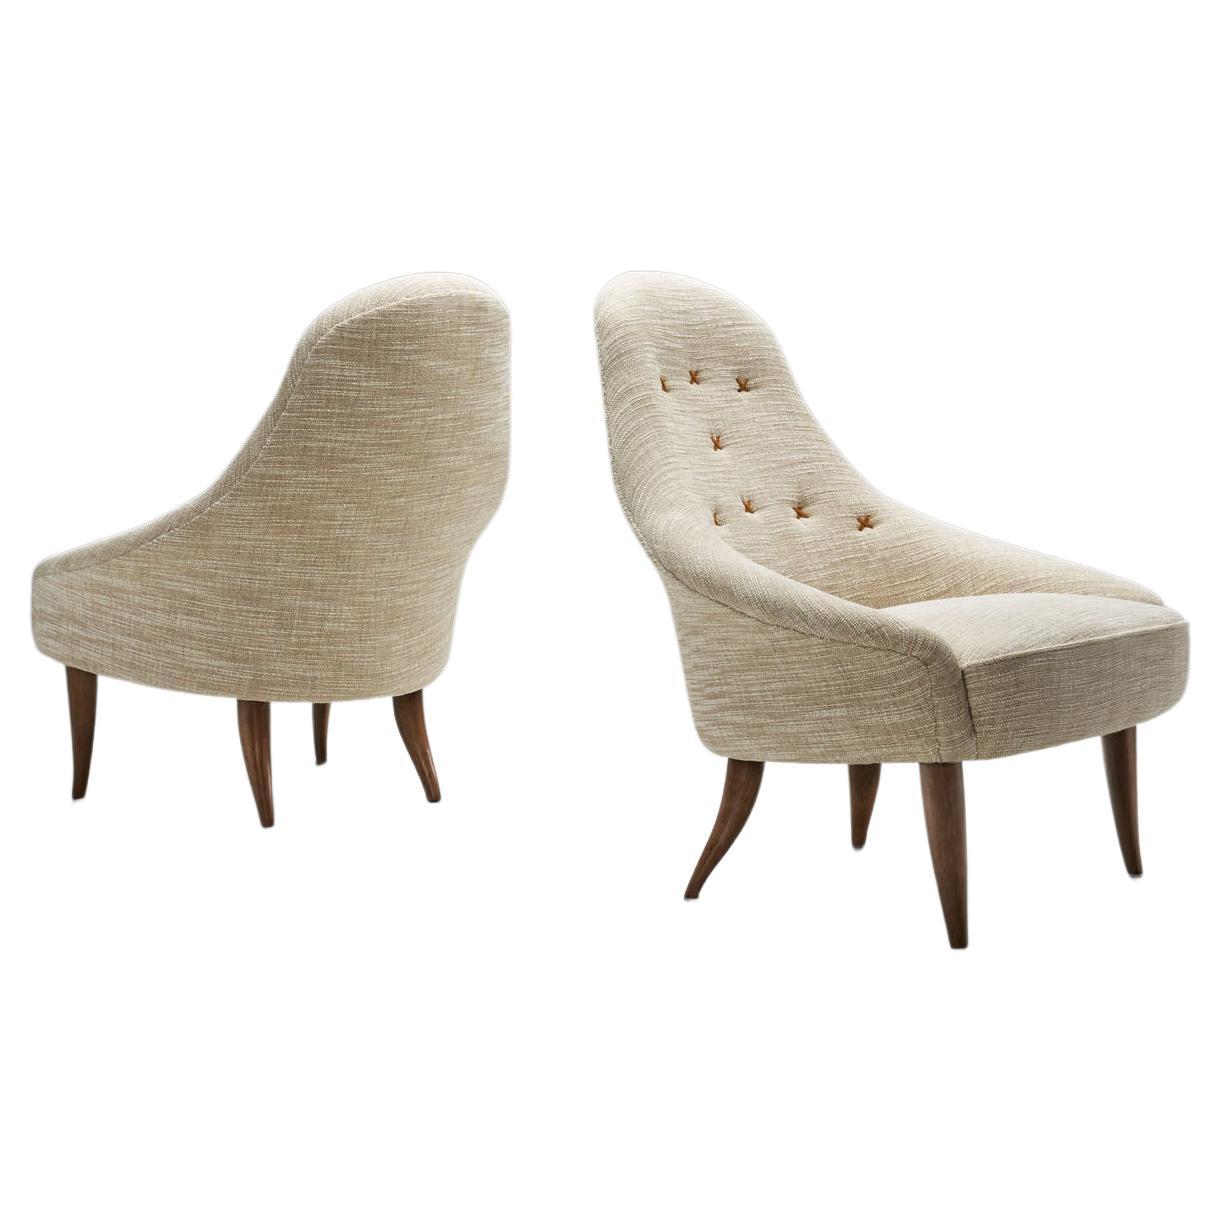 Pair of "Lilla Eva" Chairs by Kerstin Hörlin-Holmquist, Sweden 1950s For Sale